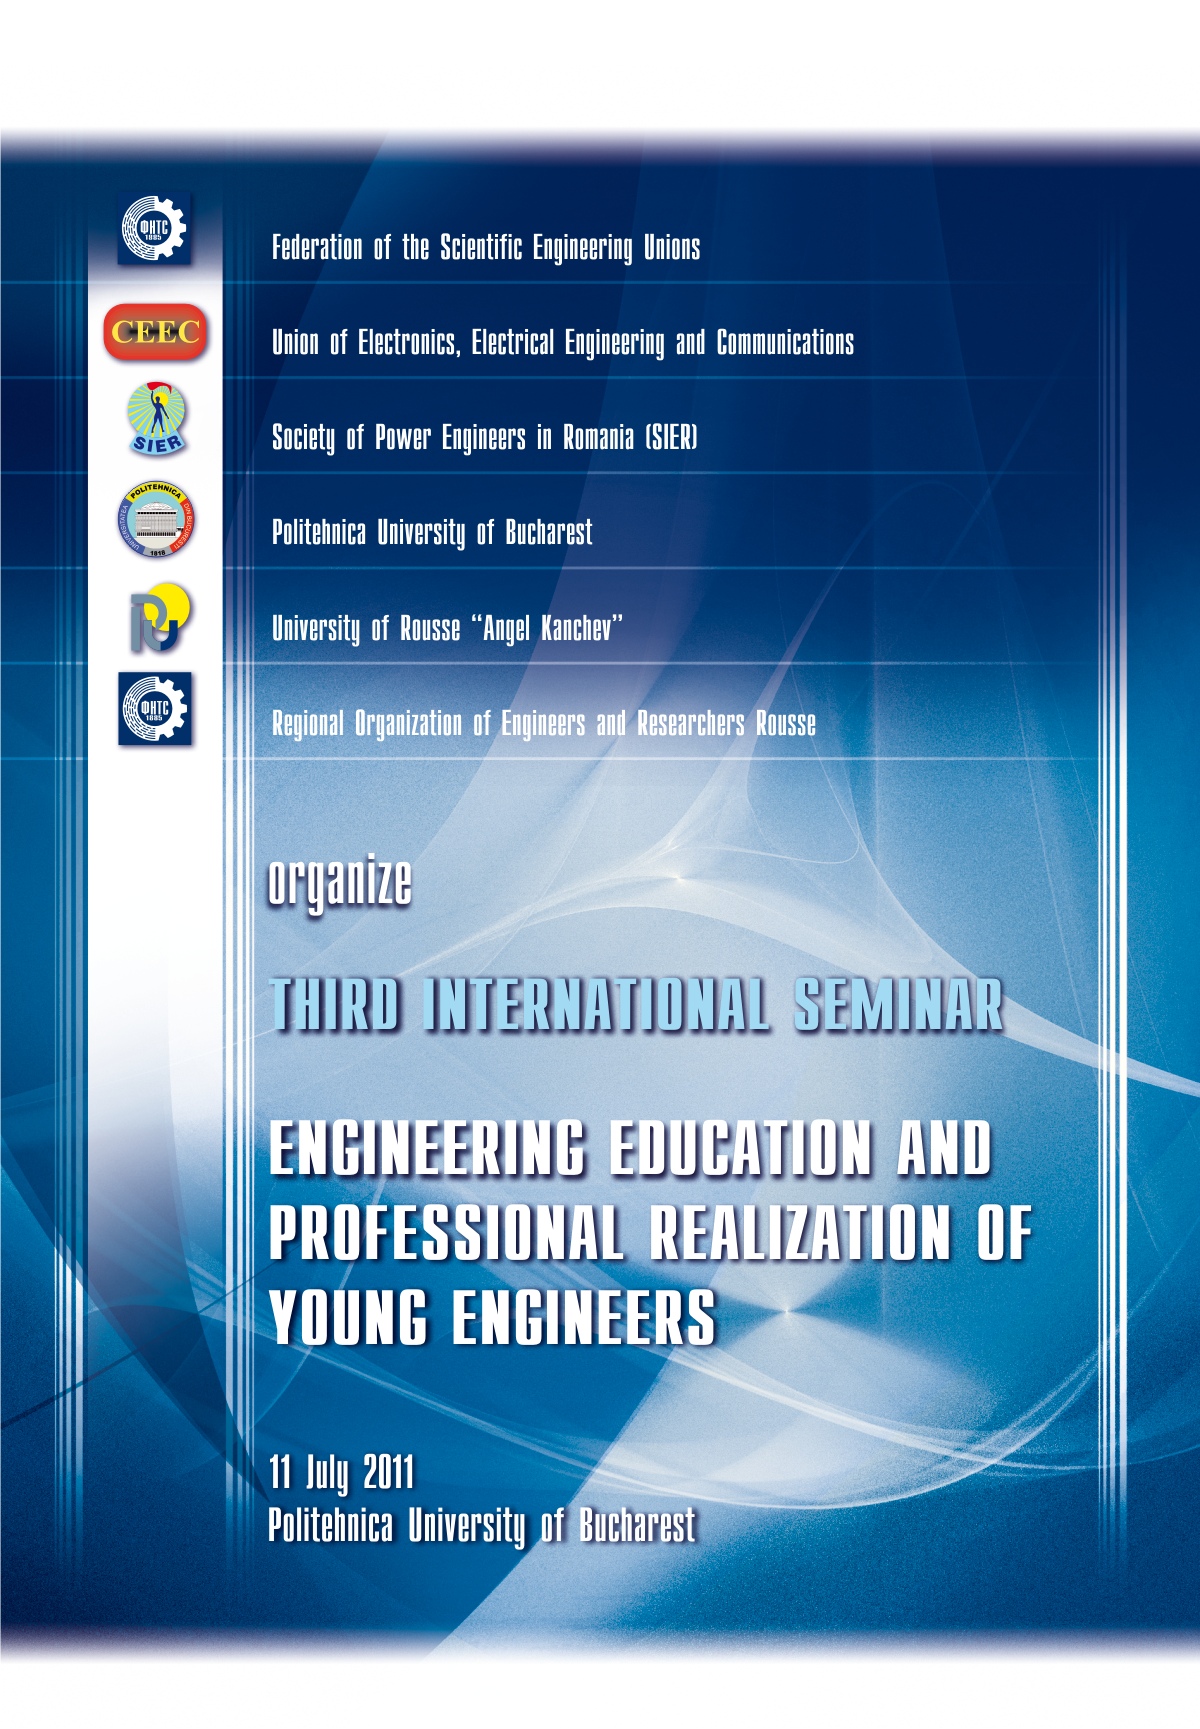 3rd International Seminar - Engineering education and professional realization of young engineers